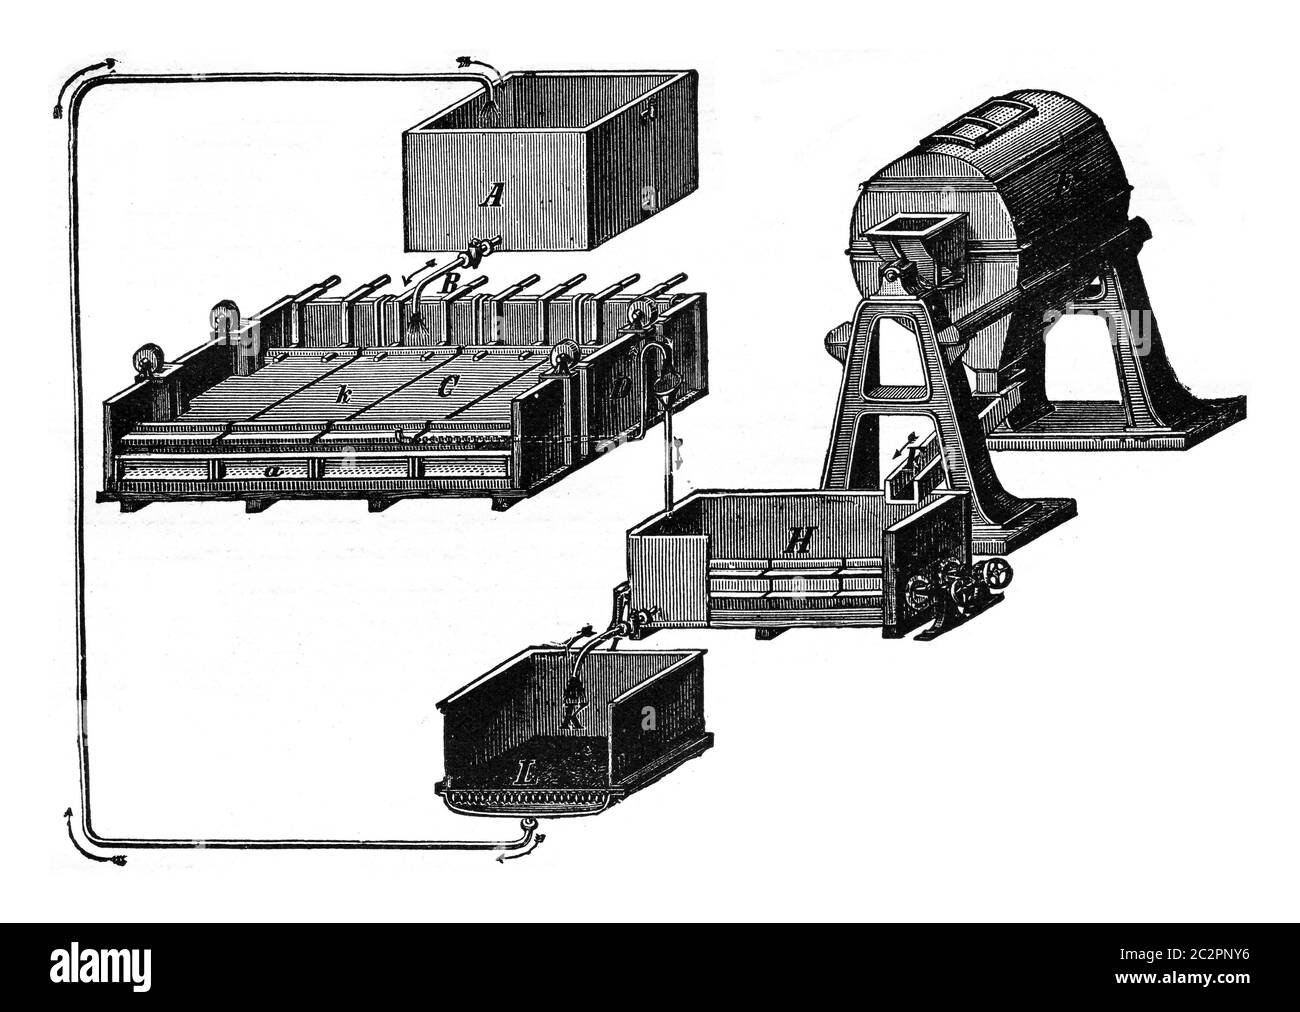 Siemens-Halske equipment for extraction of copper from its ores by electrolysis, vintage engraved illustration. Industrial encyclopedia E.-O. Lami - 1 Stock Photo